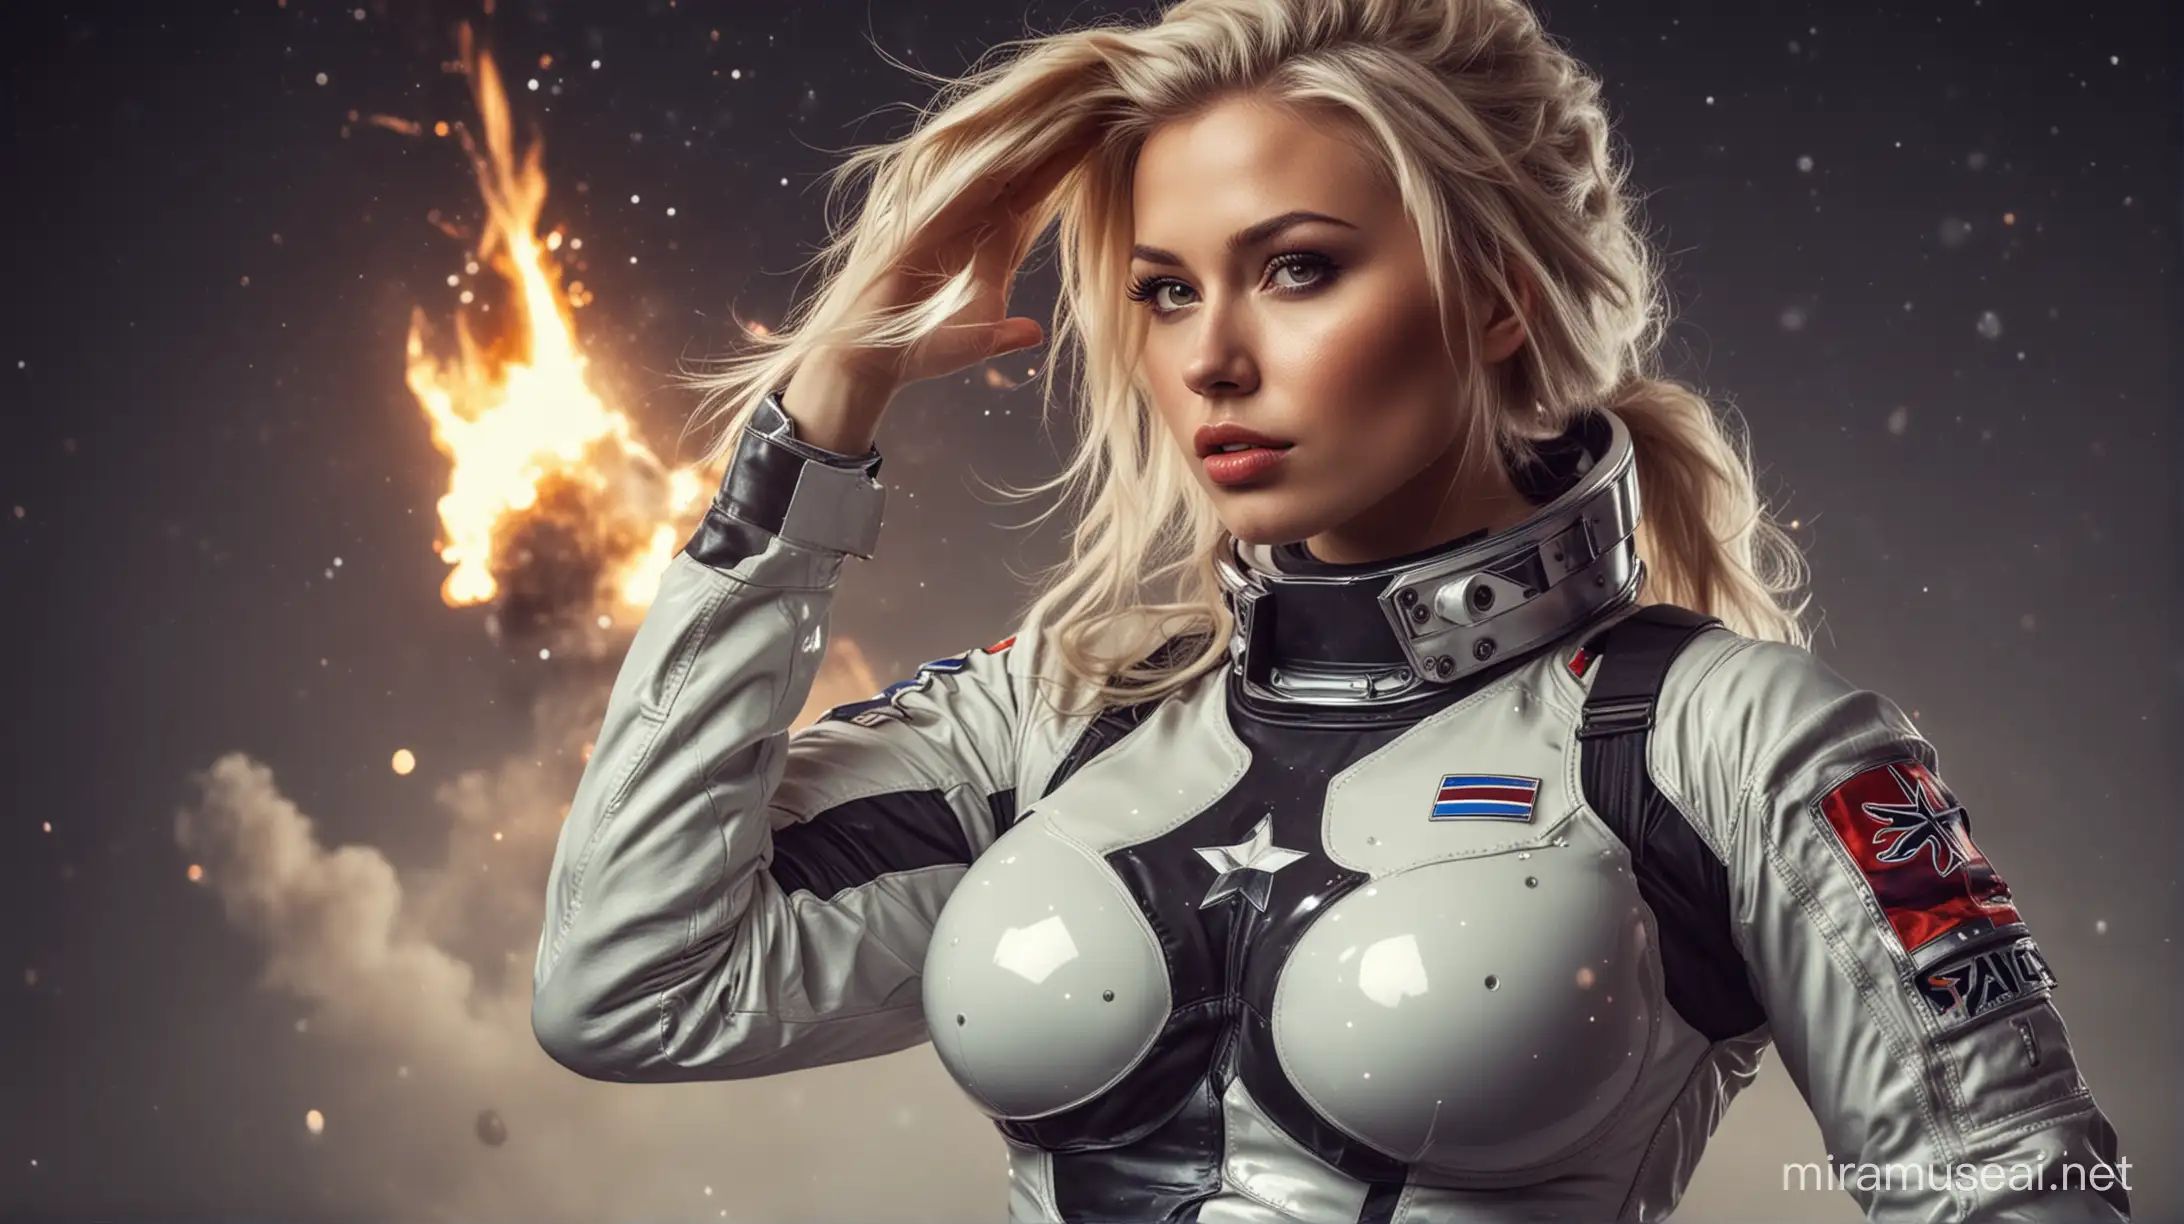 Sexy Norwegian girl saluting like soldier, complicated hair style, fat lips, very big boobs, round boobs, tight spacesuit, flames style colored spacesuit, armored spacesuit, glowing spacesuit, space, galaxies, planets, bright sparkles around